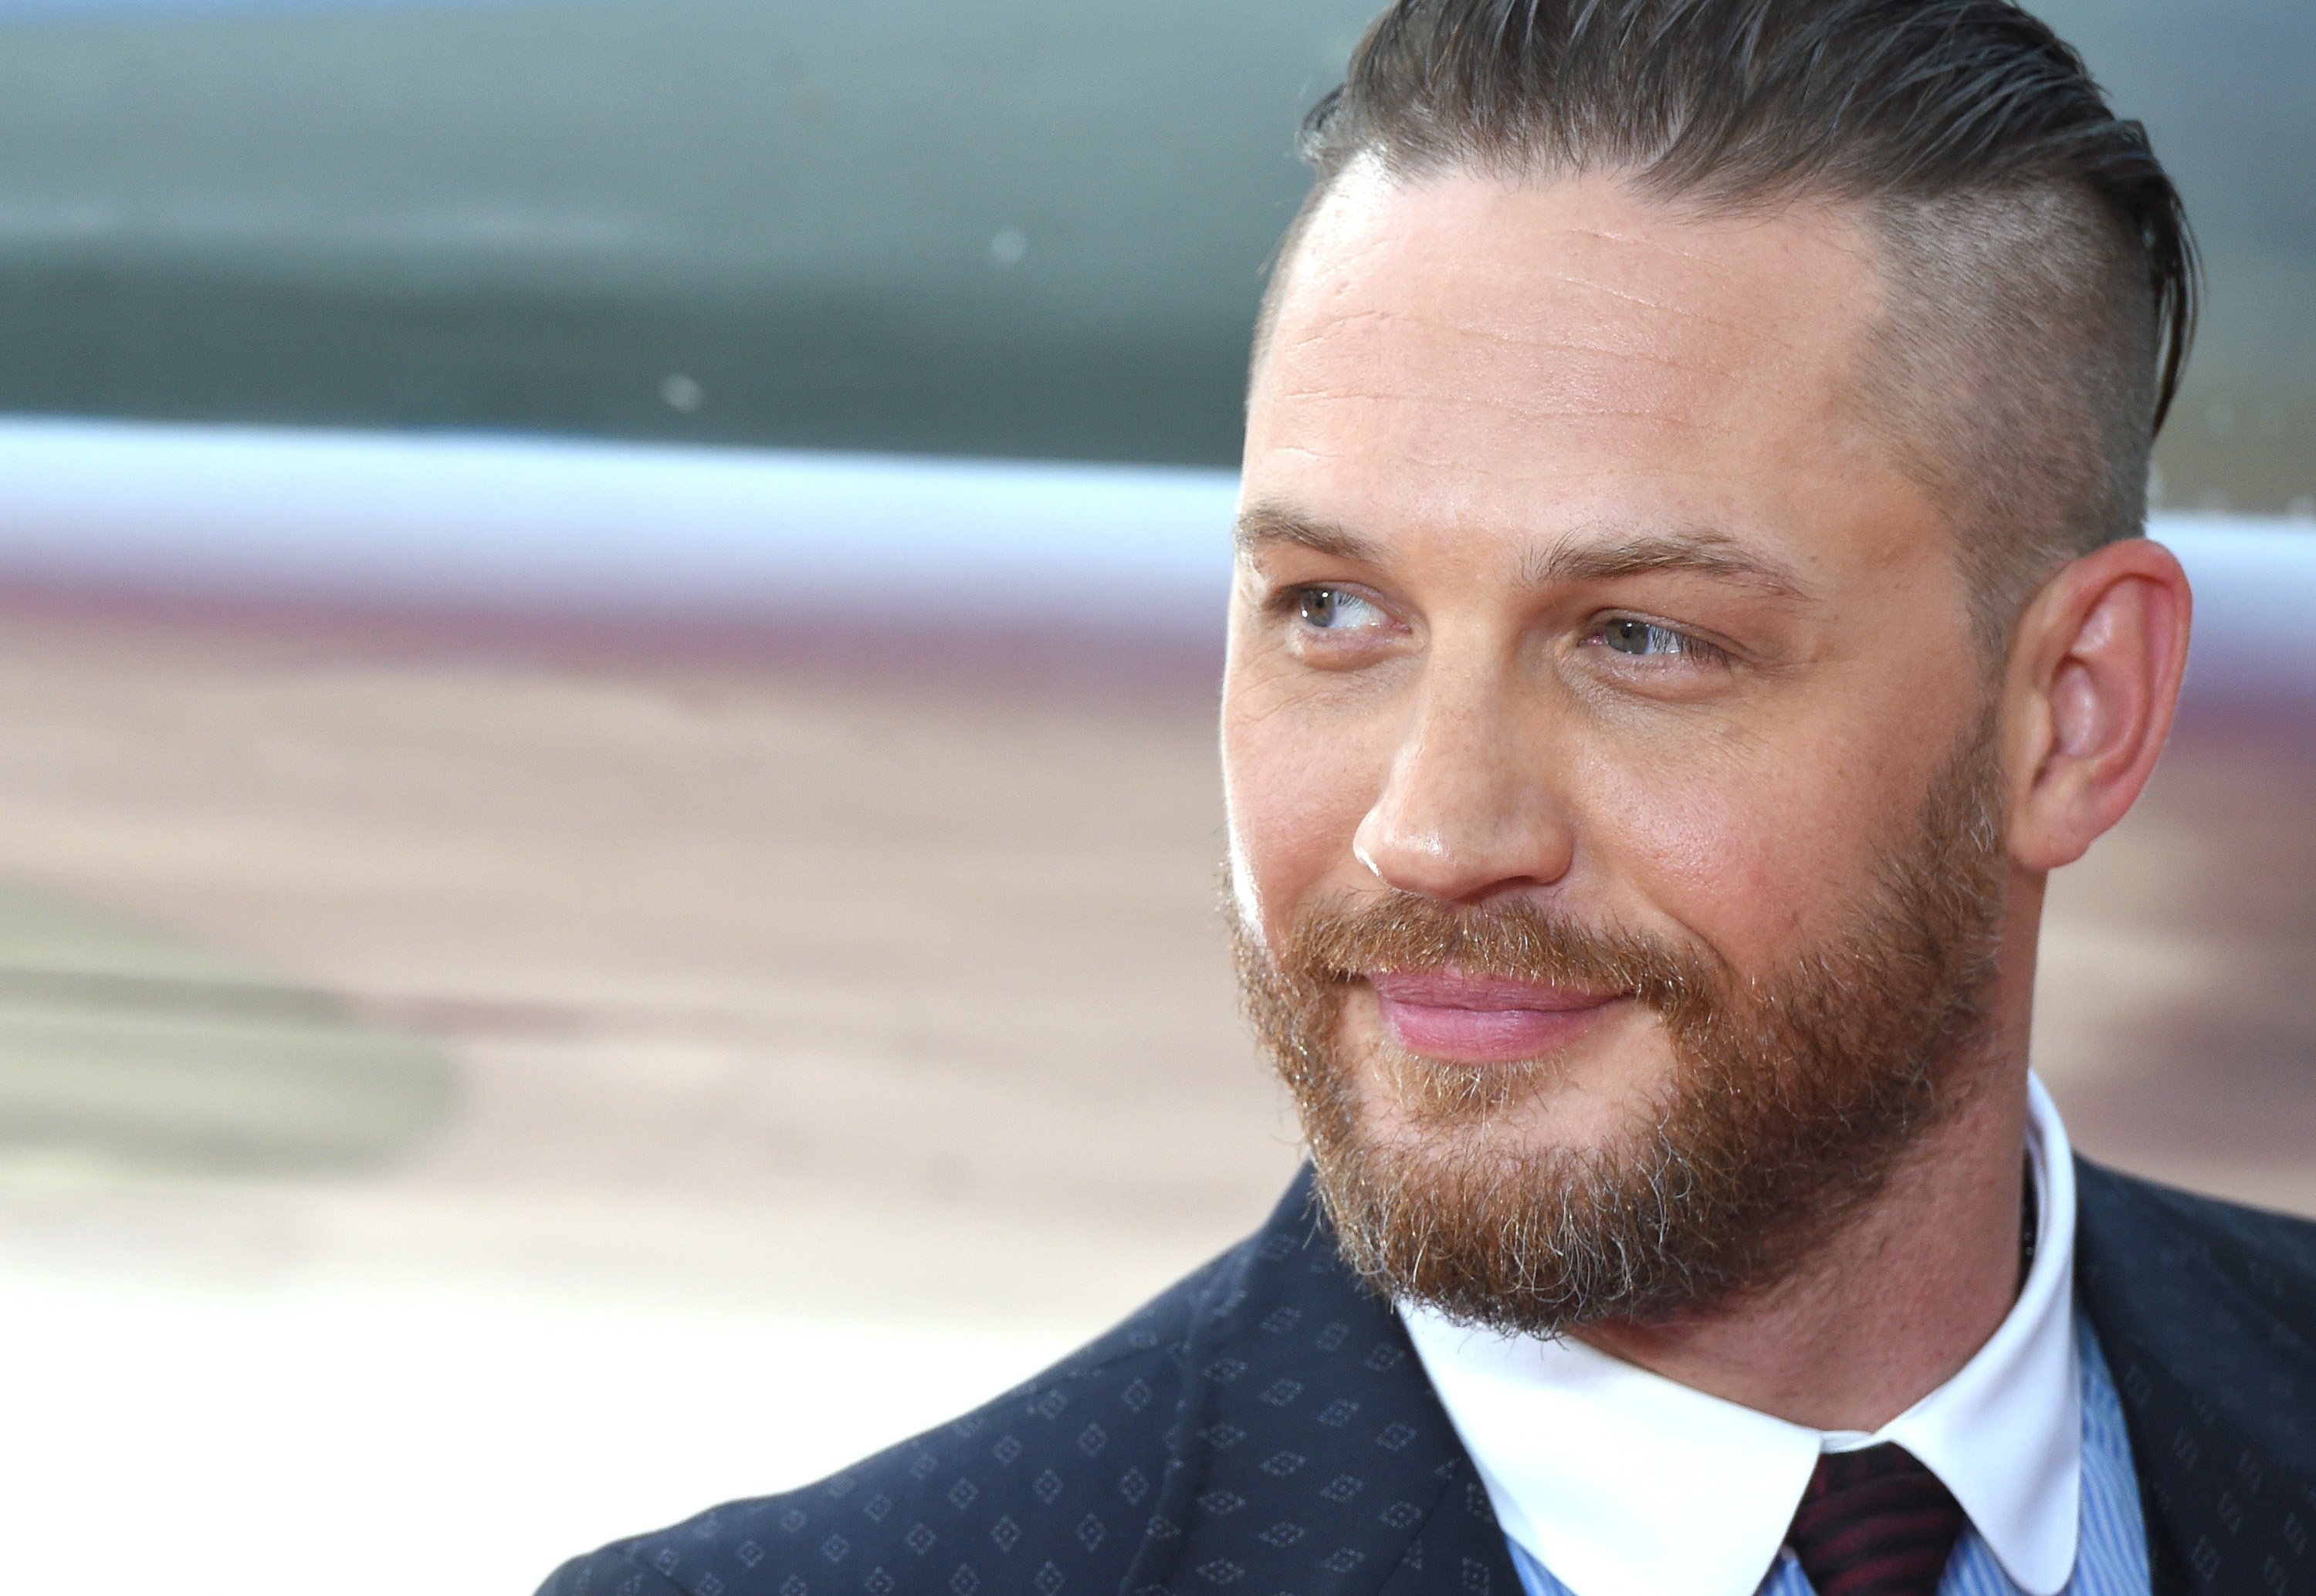 Tom Hardy, who plays Alfie in 'Peaky Blinders,' smiles for a photo wearing a suit and tie. He also has a beard.